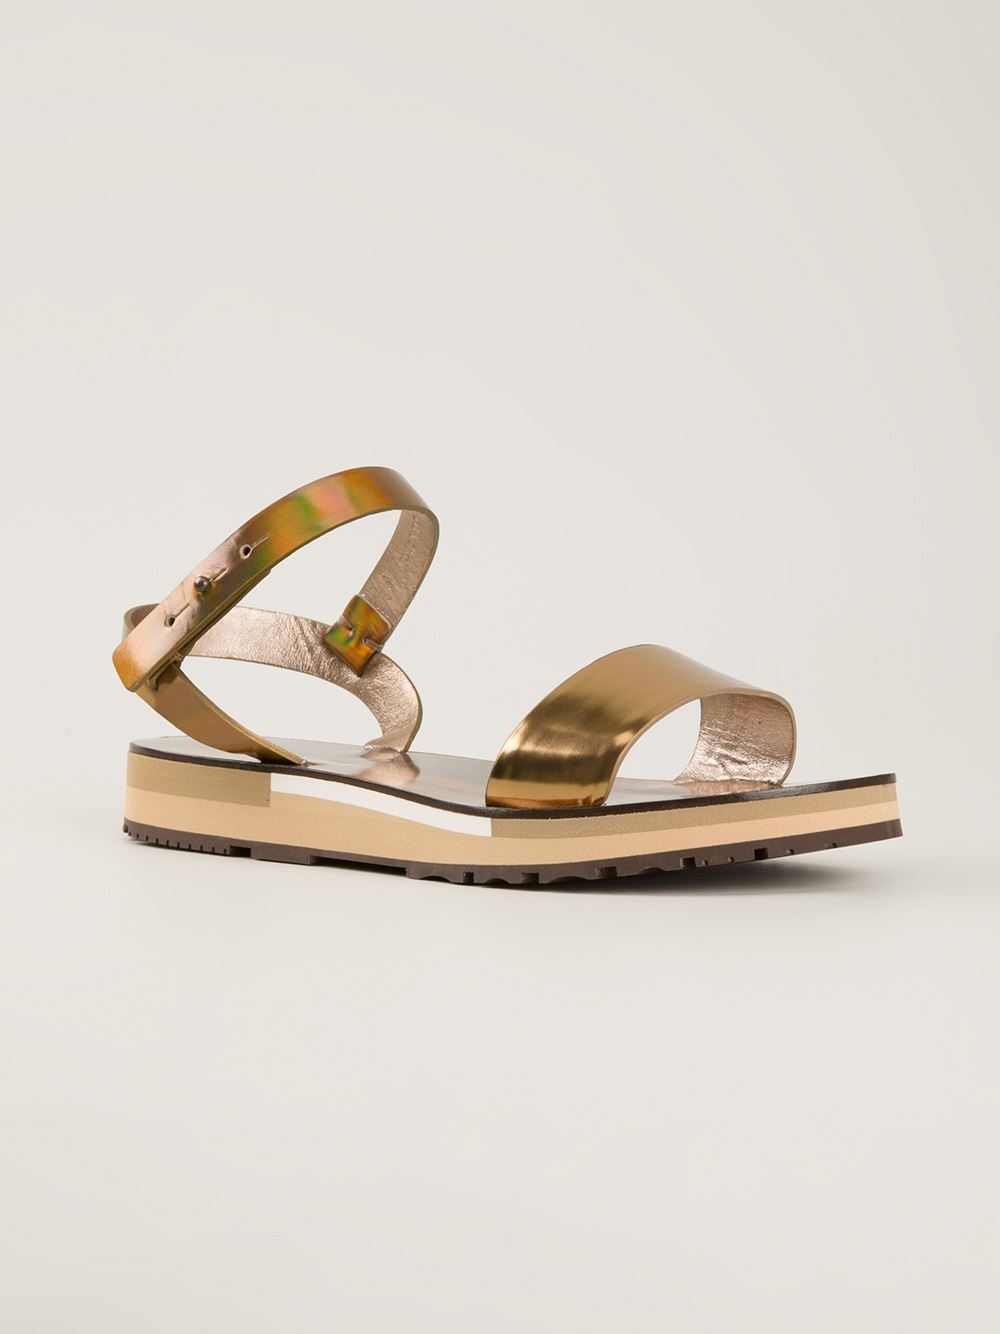 Gold-tone goatskin flat sandal from lanvin featuring an ankle strap ...